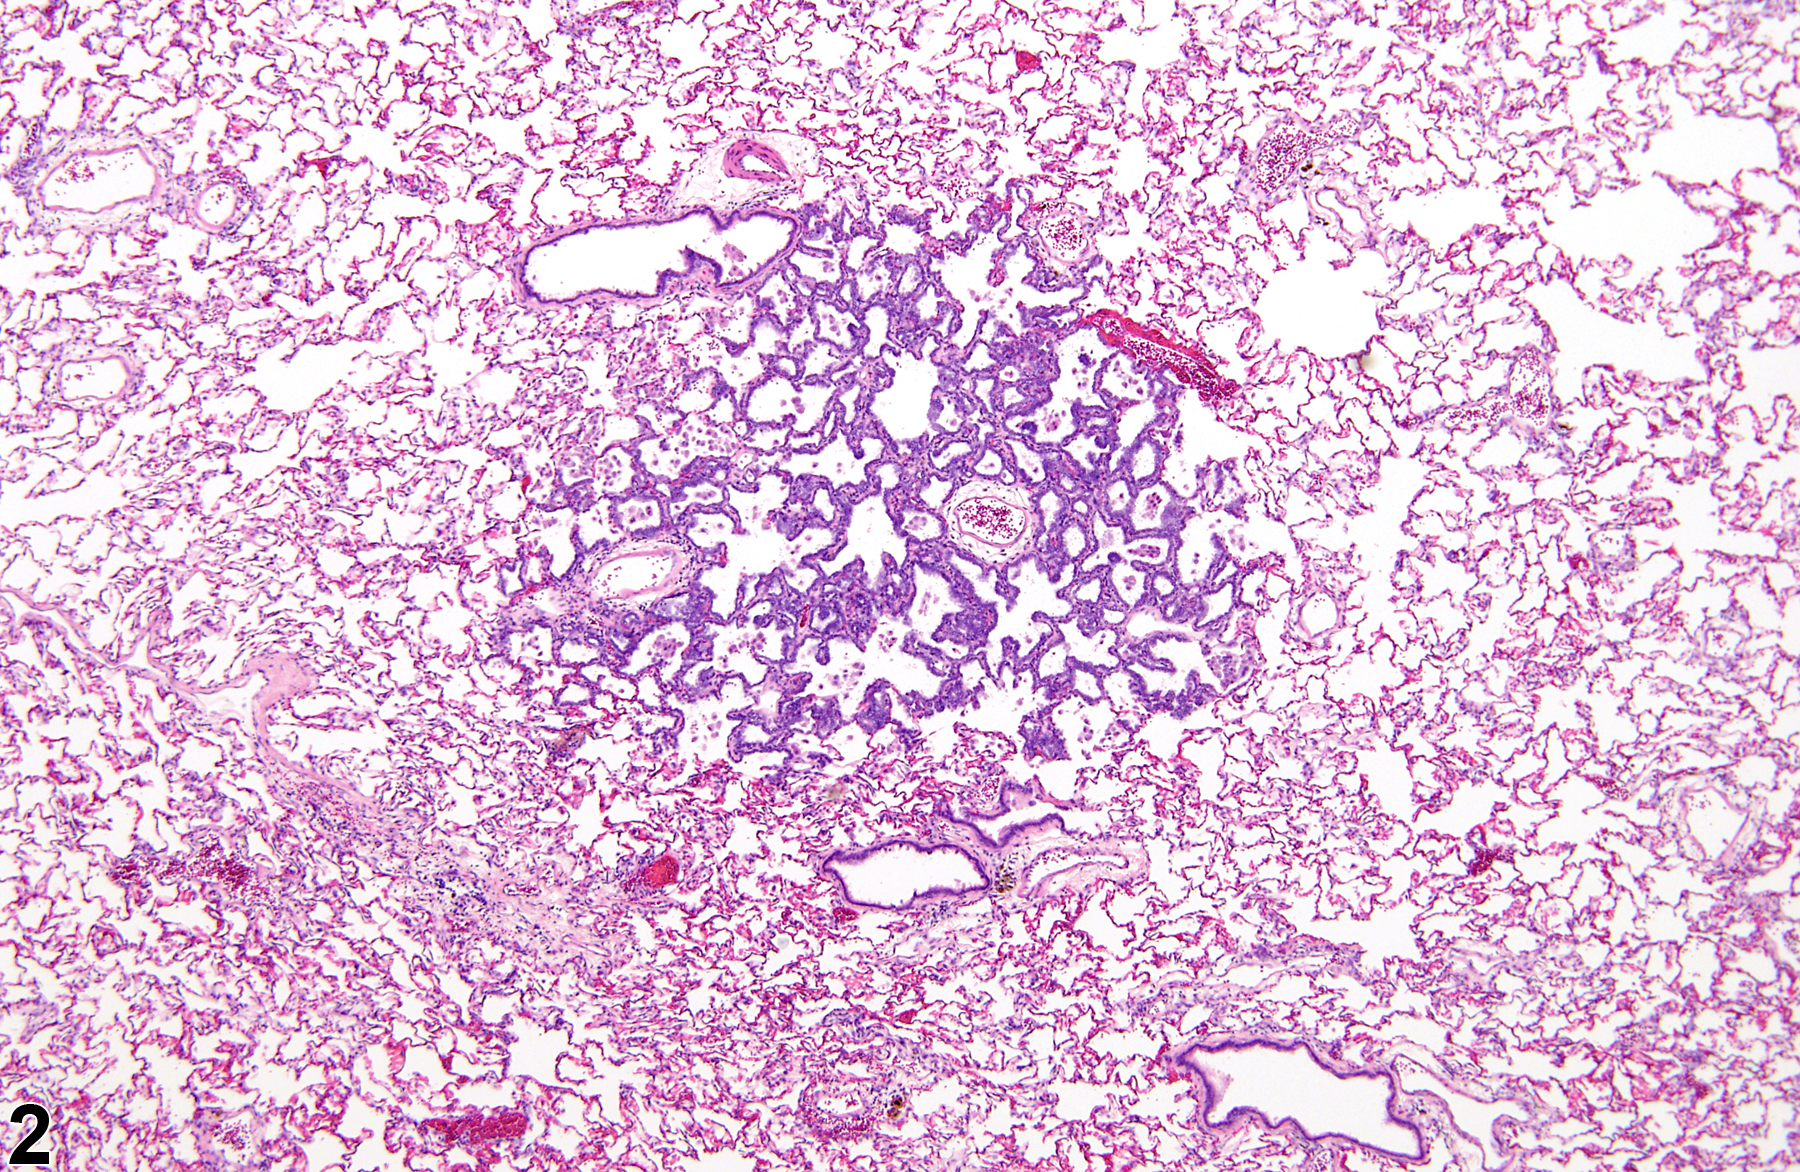 Image of alveolar epithelial hyperplasia in the lung from a male F344/N rat in a chronic study